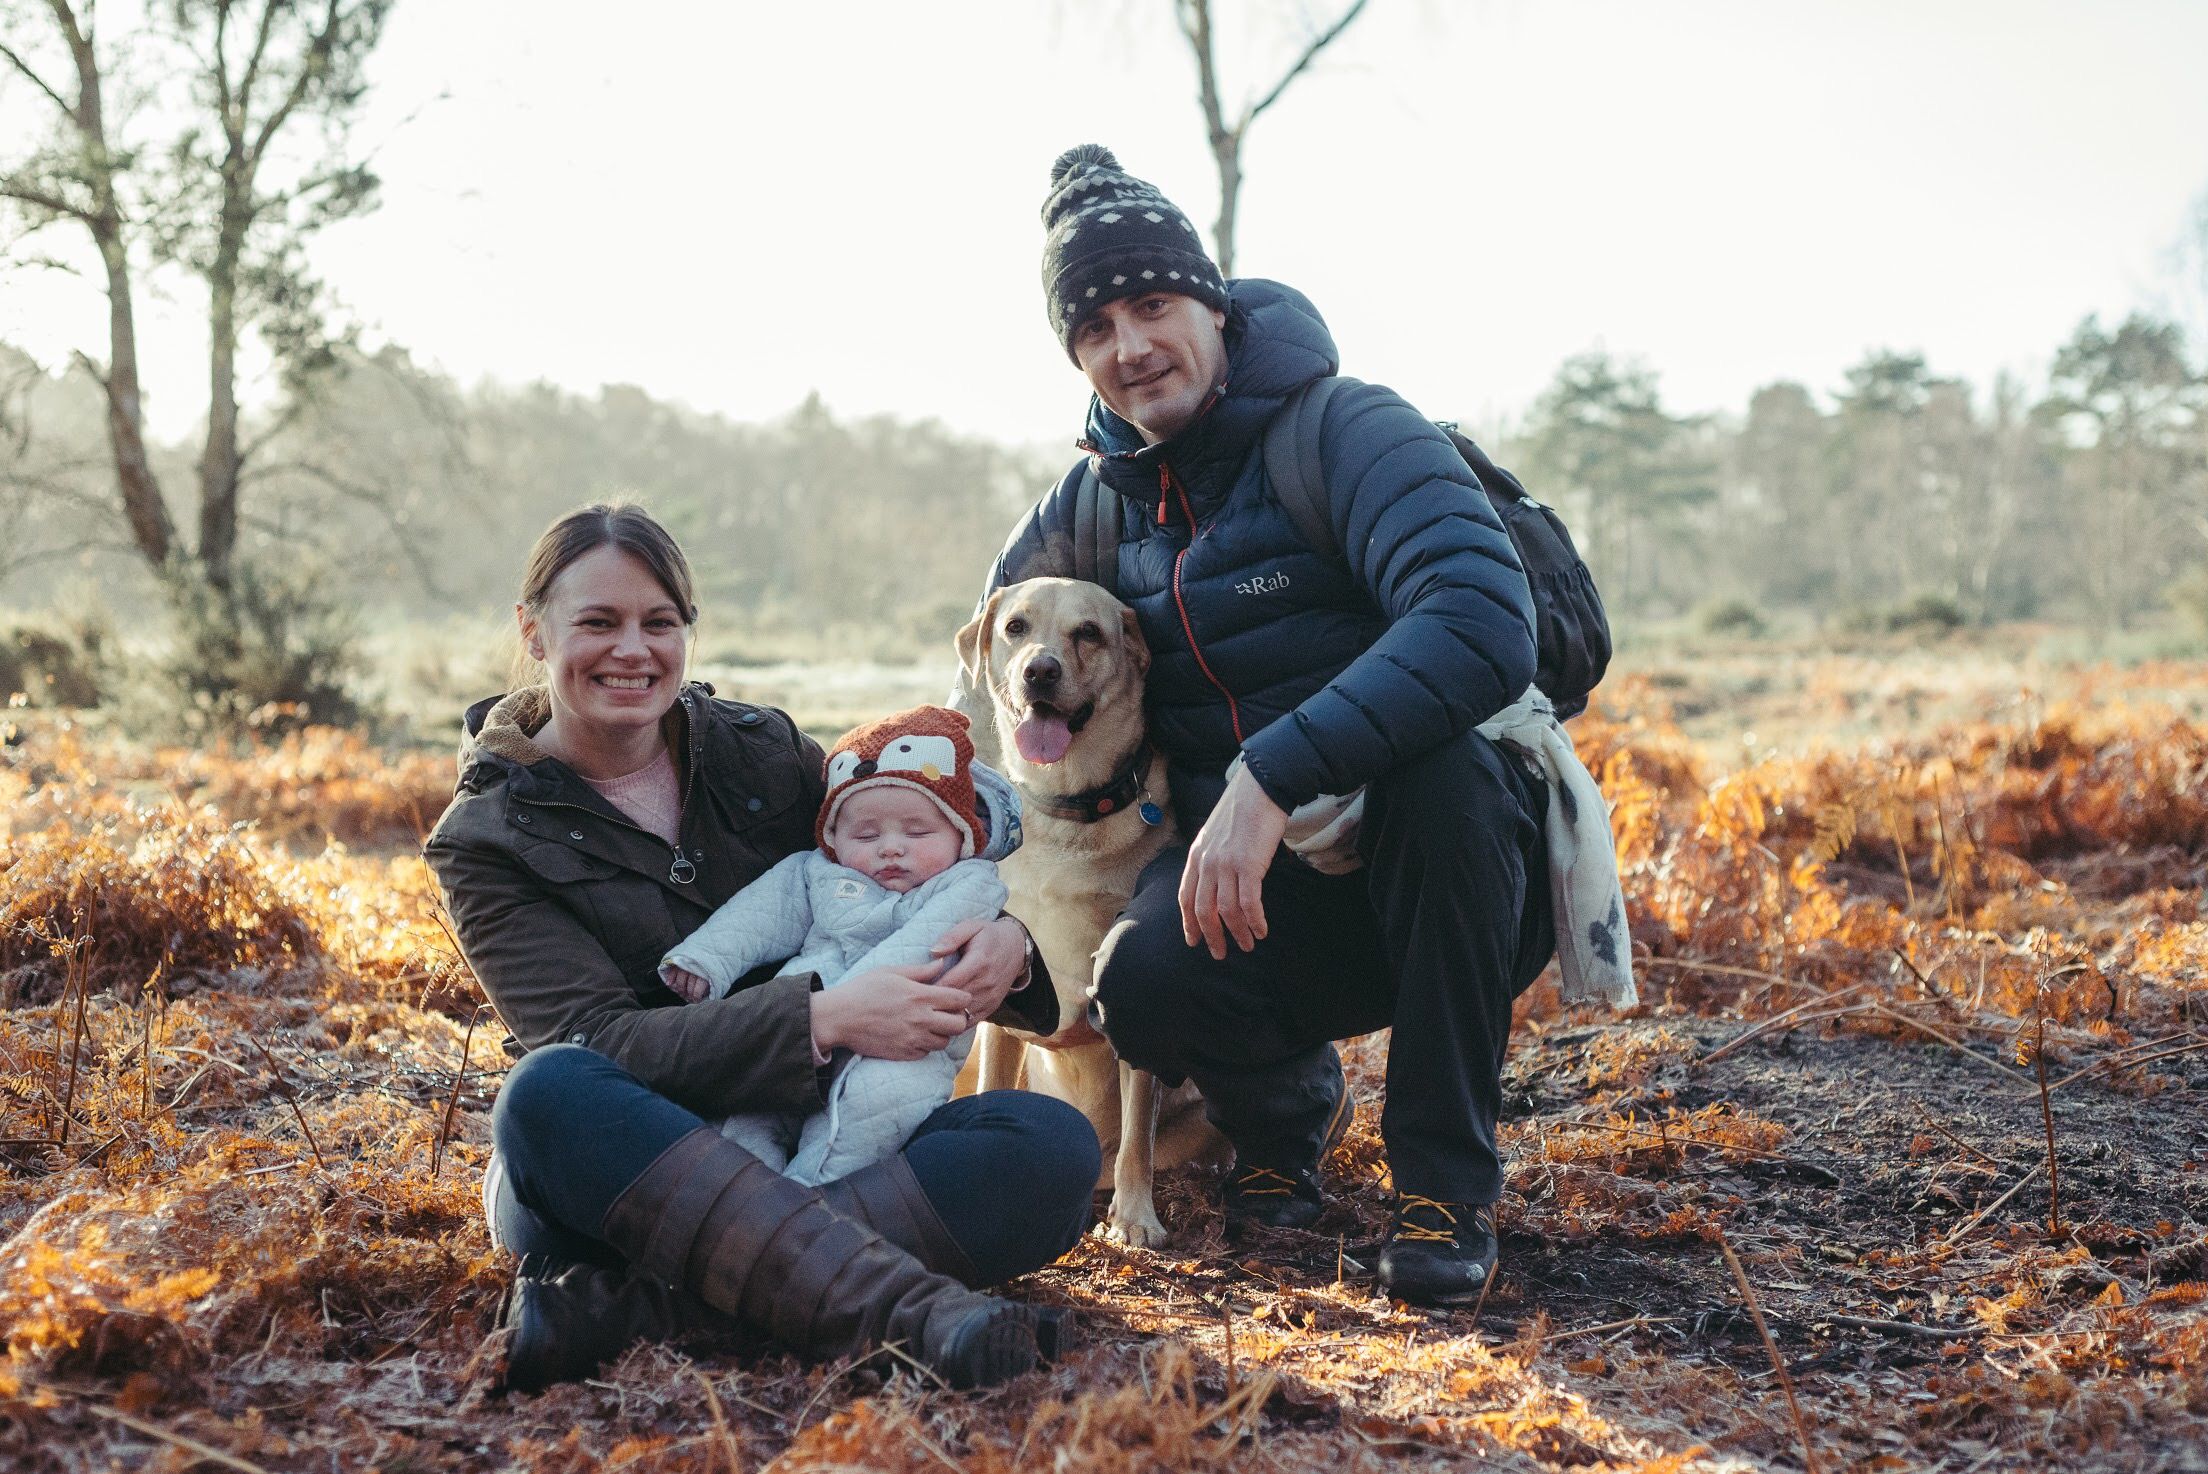 Labrador Luna poses in a Wintery landscape with a couple and a baby